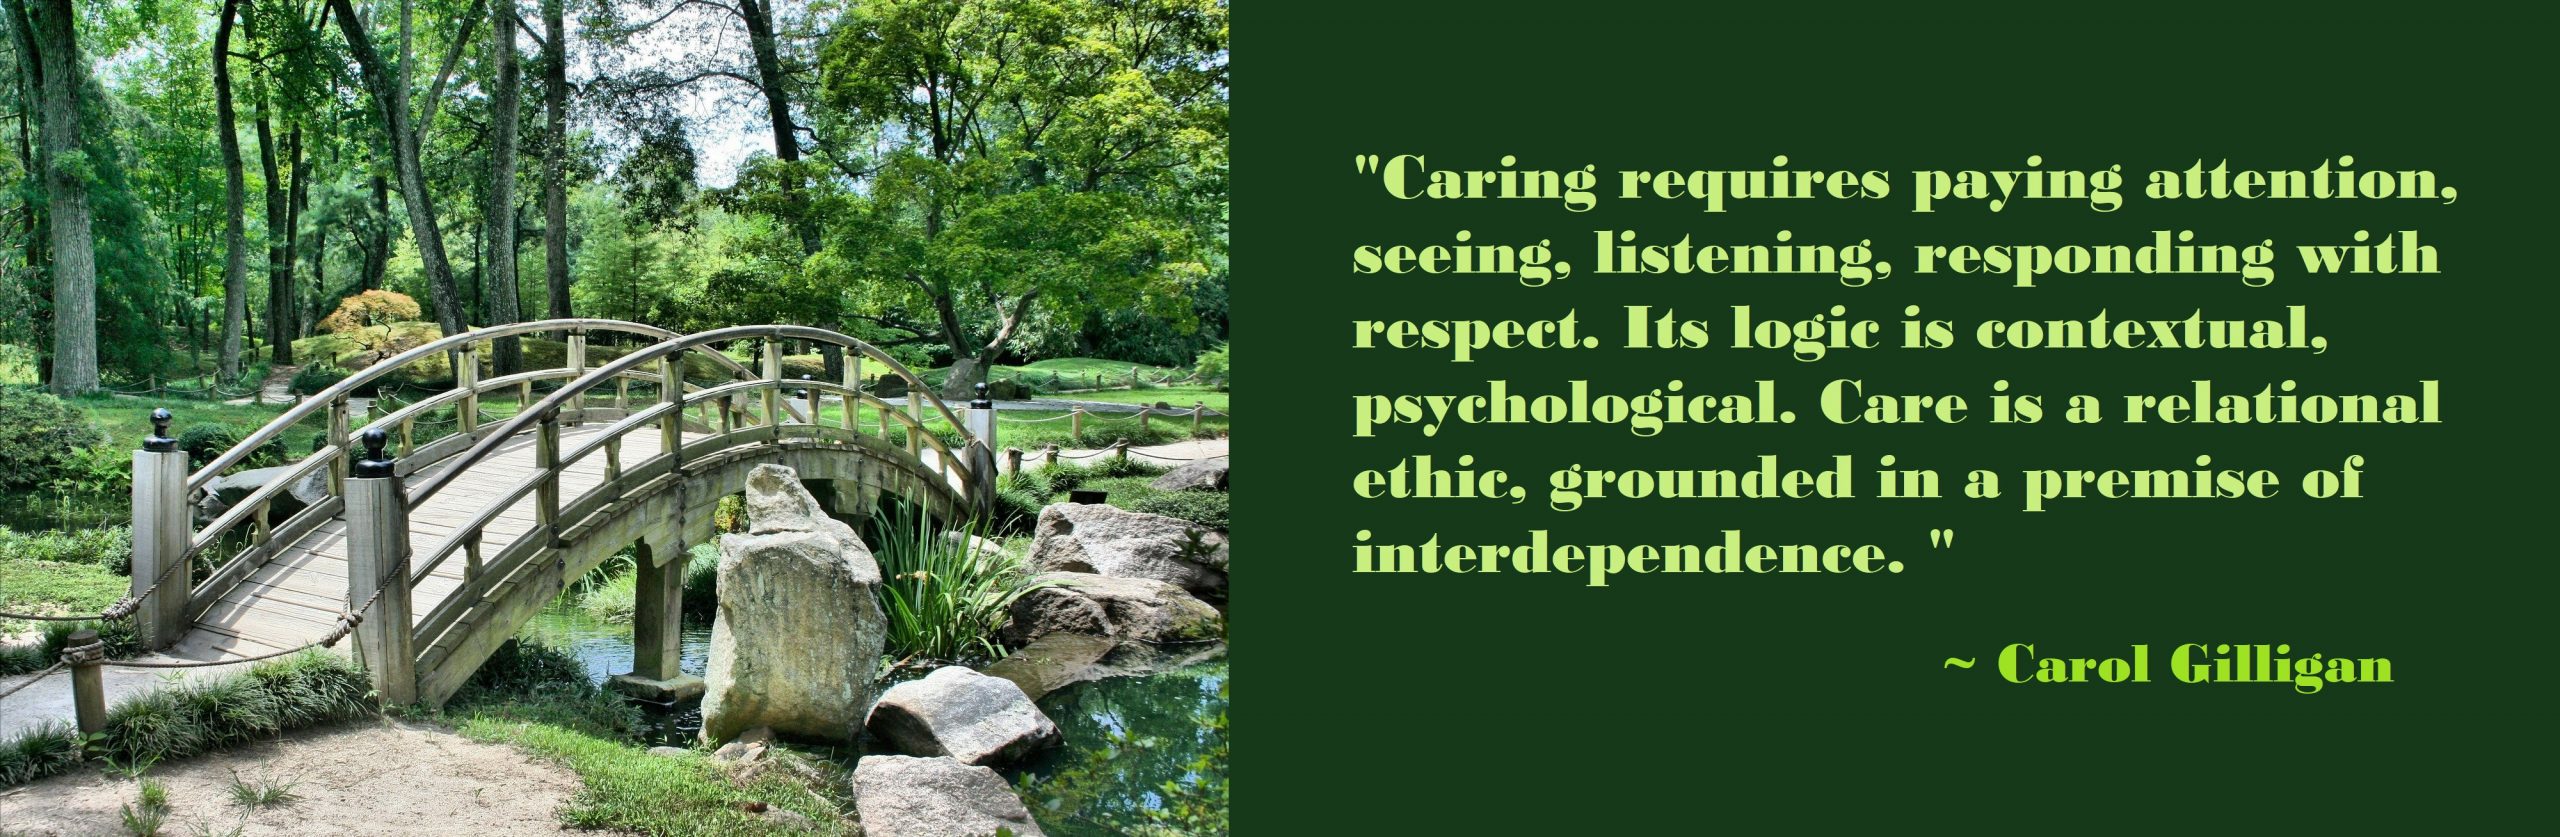 Caring requires paying attention, seeing, listening, responding with respect. Its logic is contextual, psychological. Care is a relational ethic, grounded in a premise of interdependence. Carol Gilligan